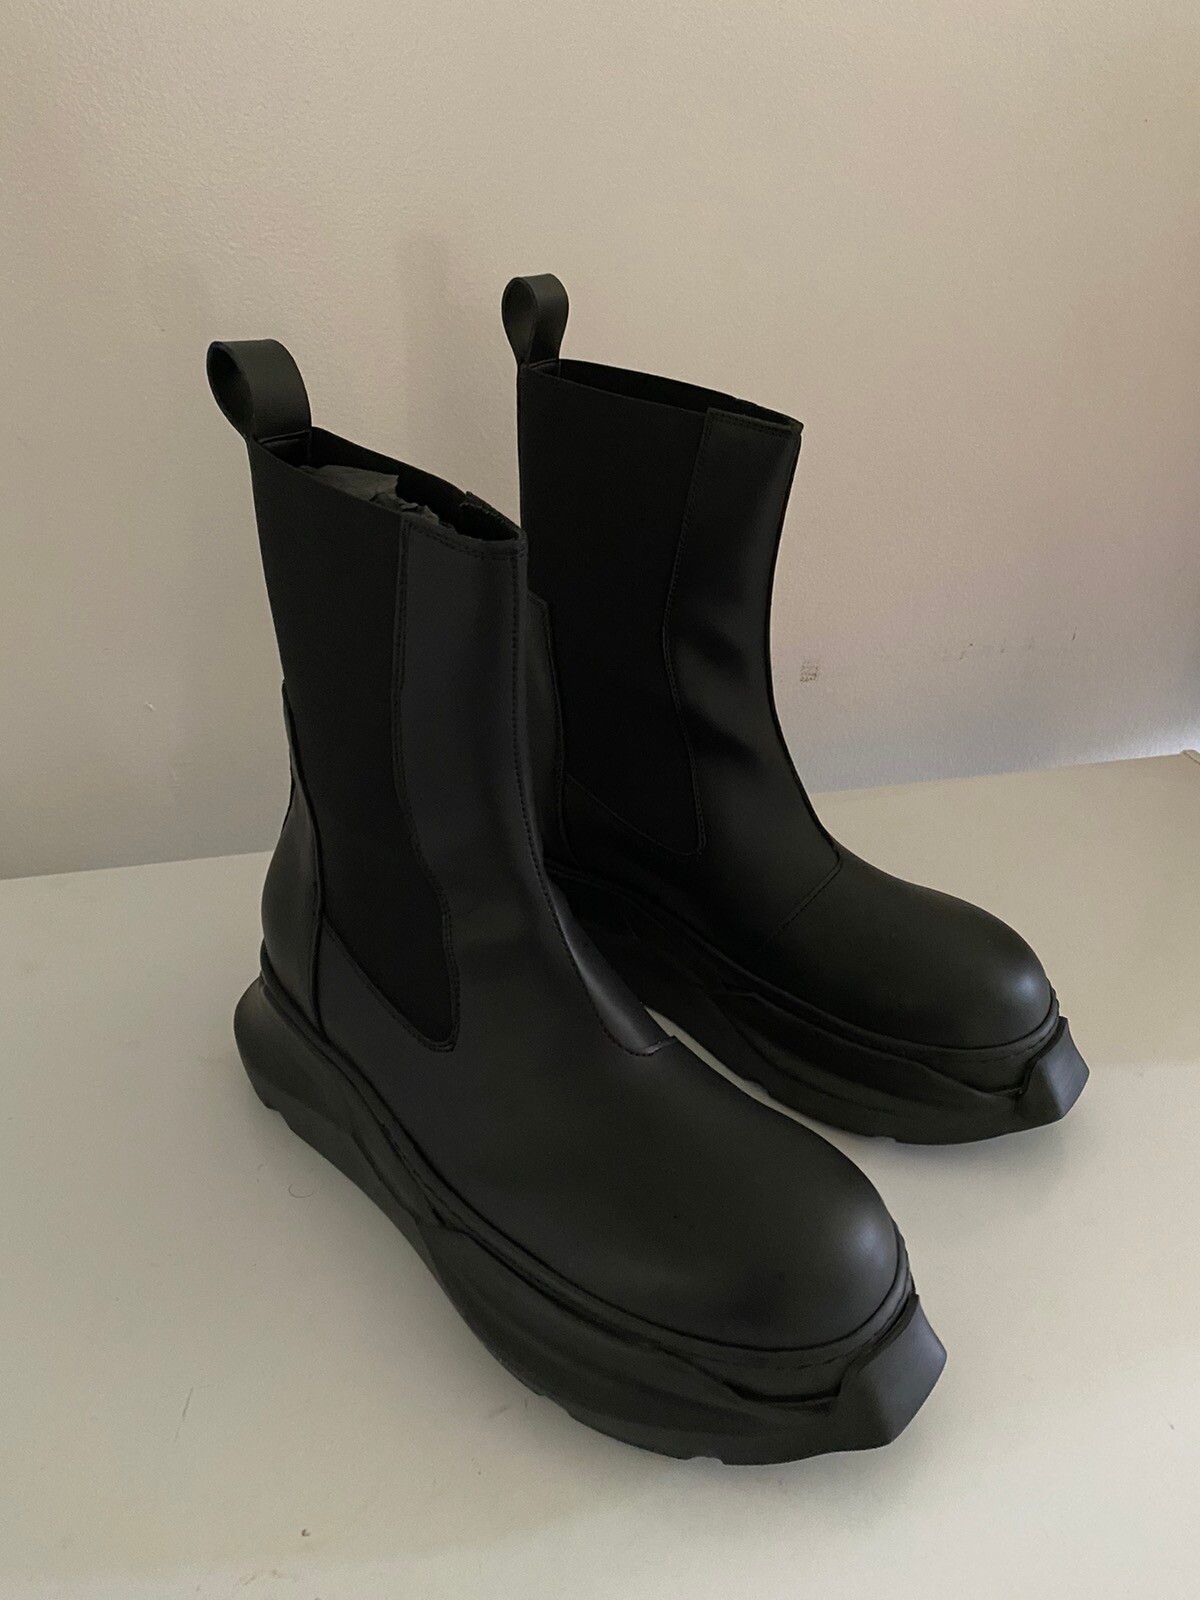 Rick Owens Rick Owens DRKSHDW Abstract Beetle Boots | Grailed